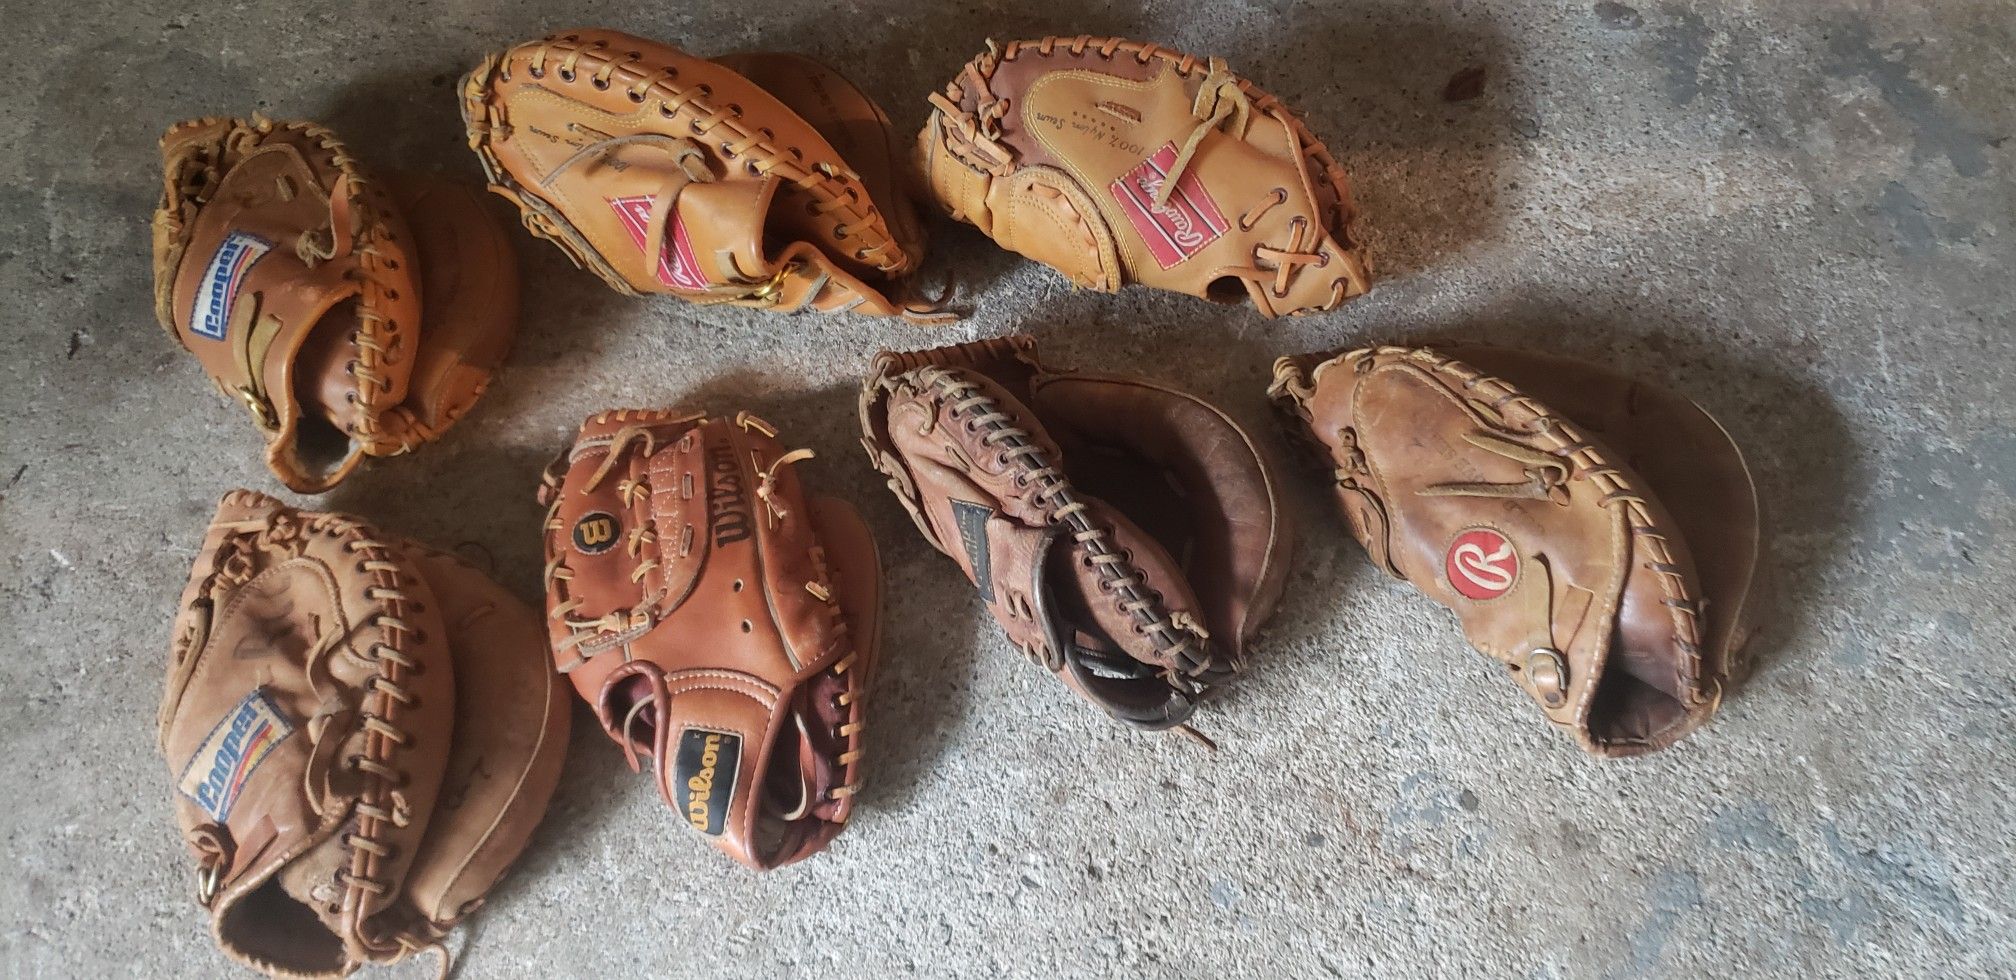 BASEBALL EQUIPTMENT Rawlings * Cooper * Wilson Catchers and 1 infield Glove(s)